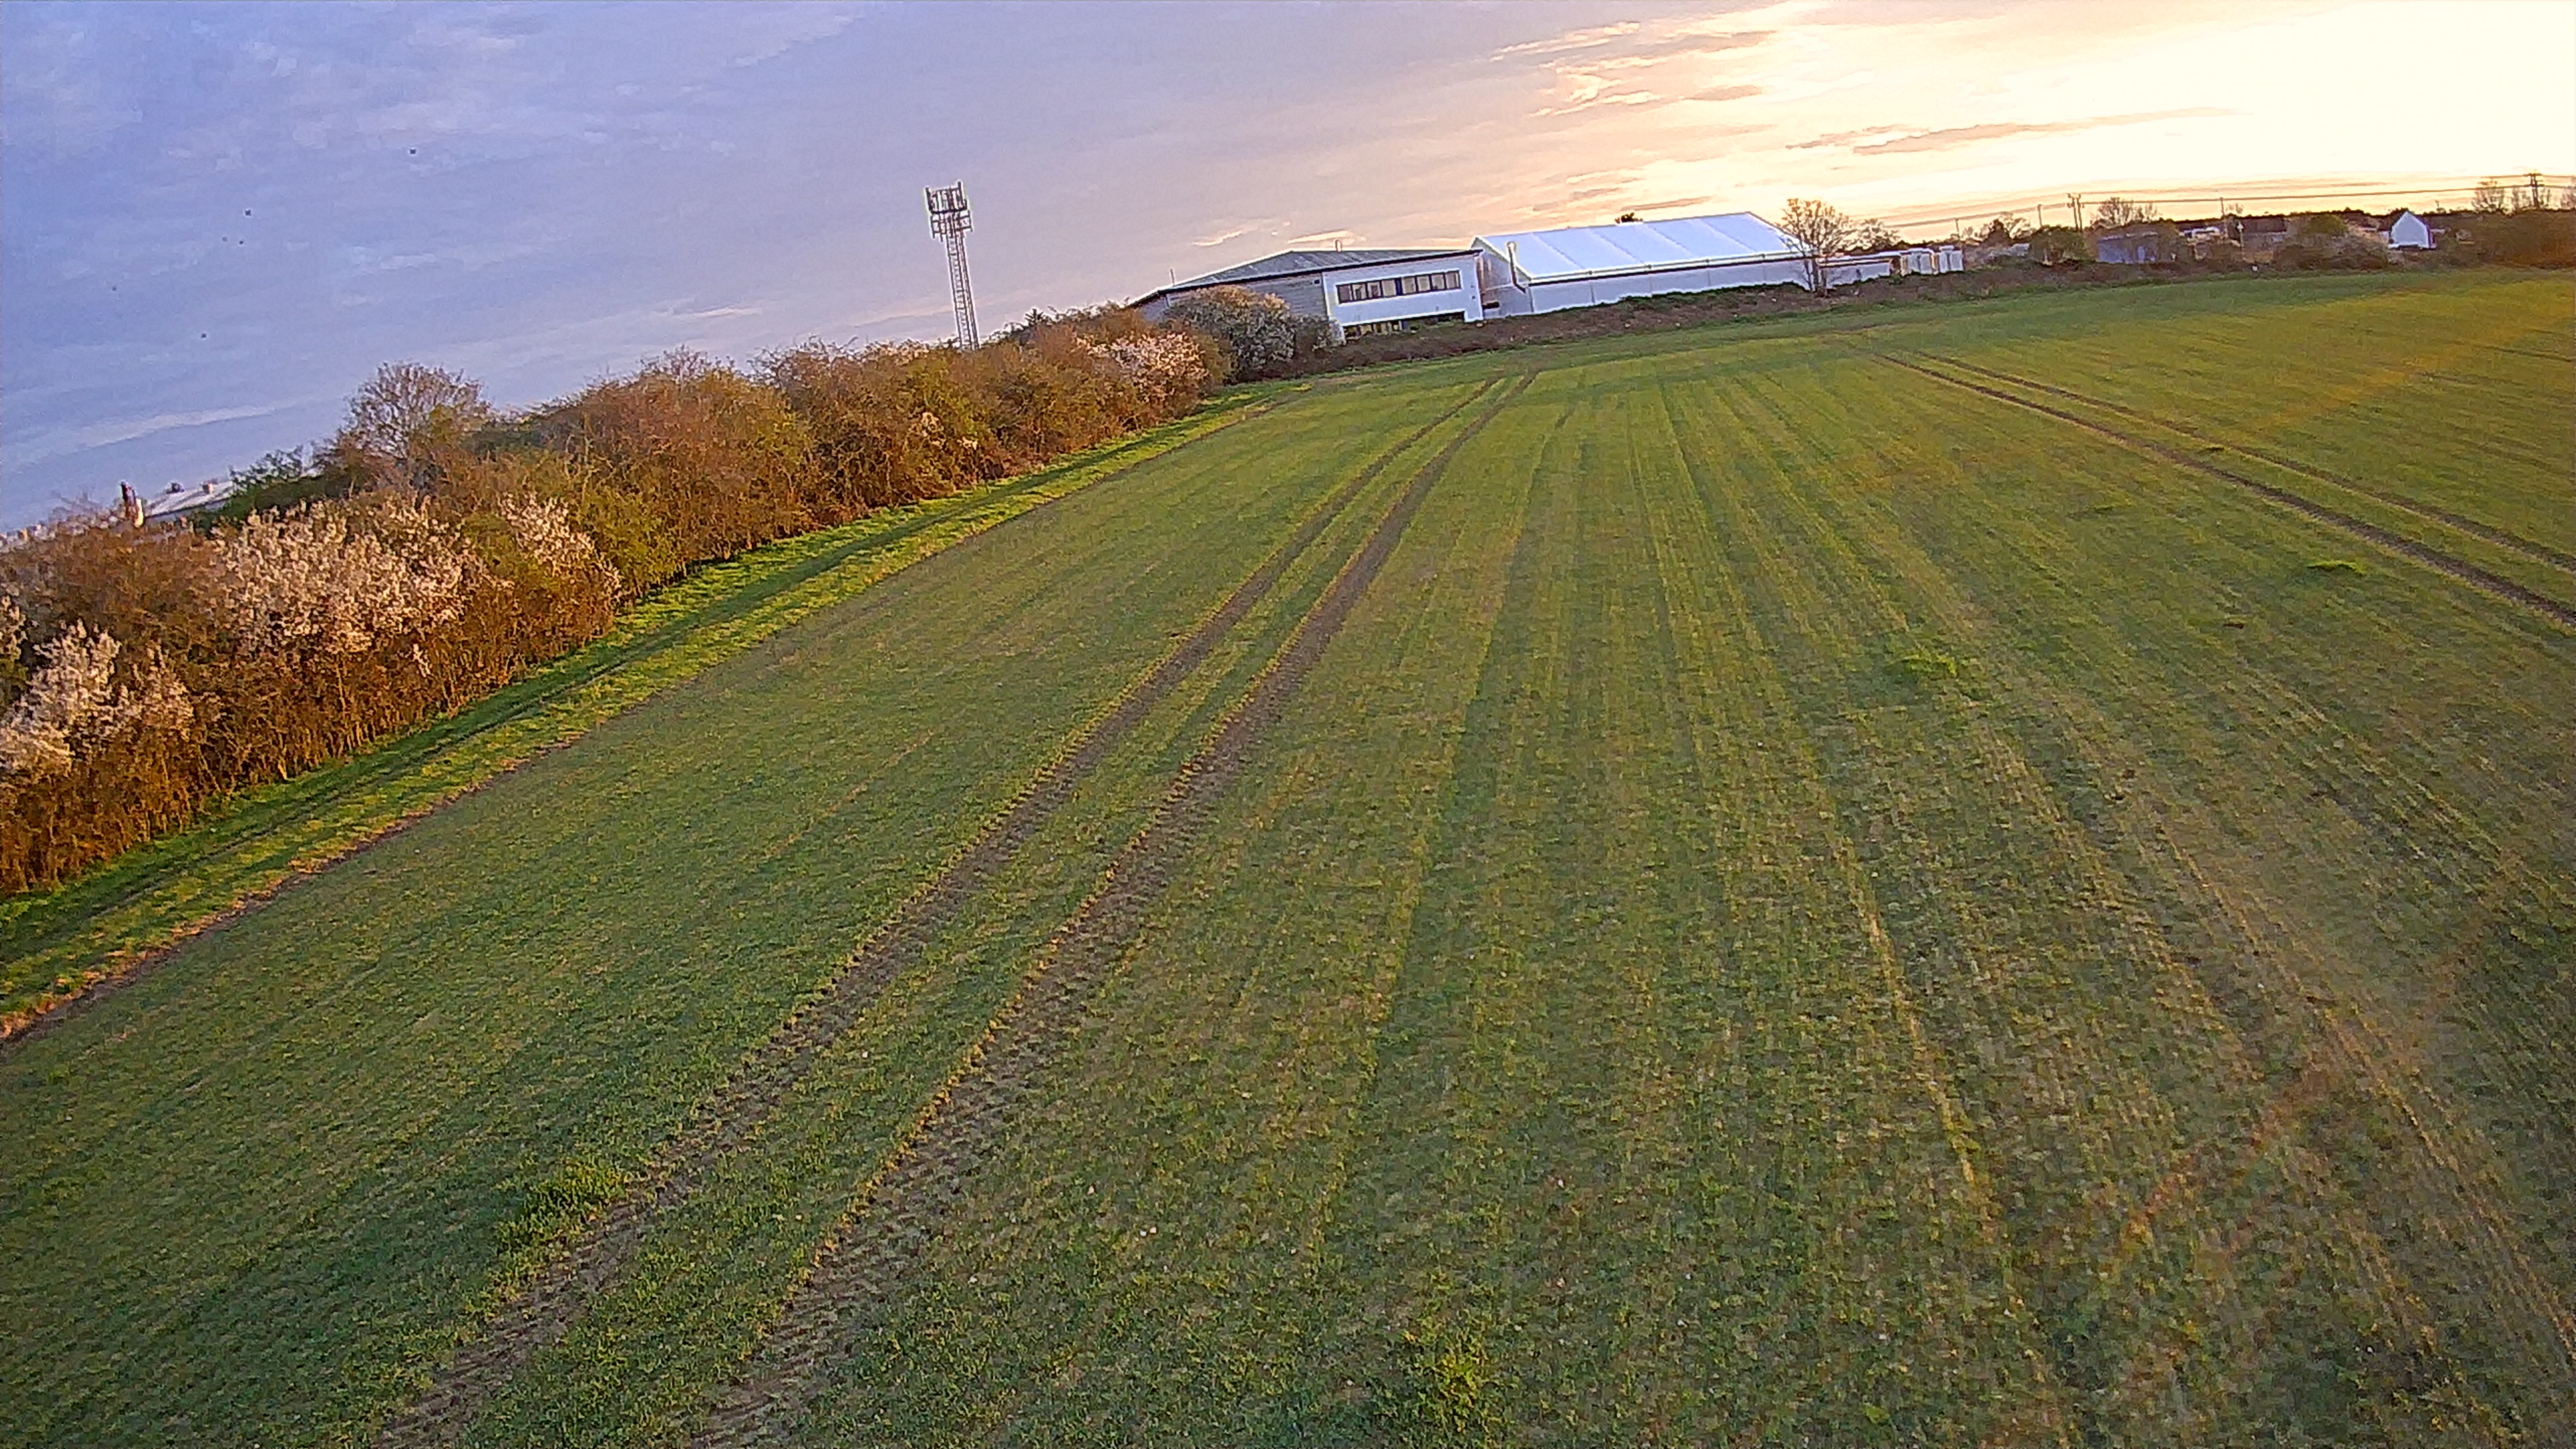 Photo of a field at sunset taken with the Holy Stone HS360S